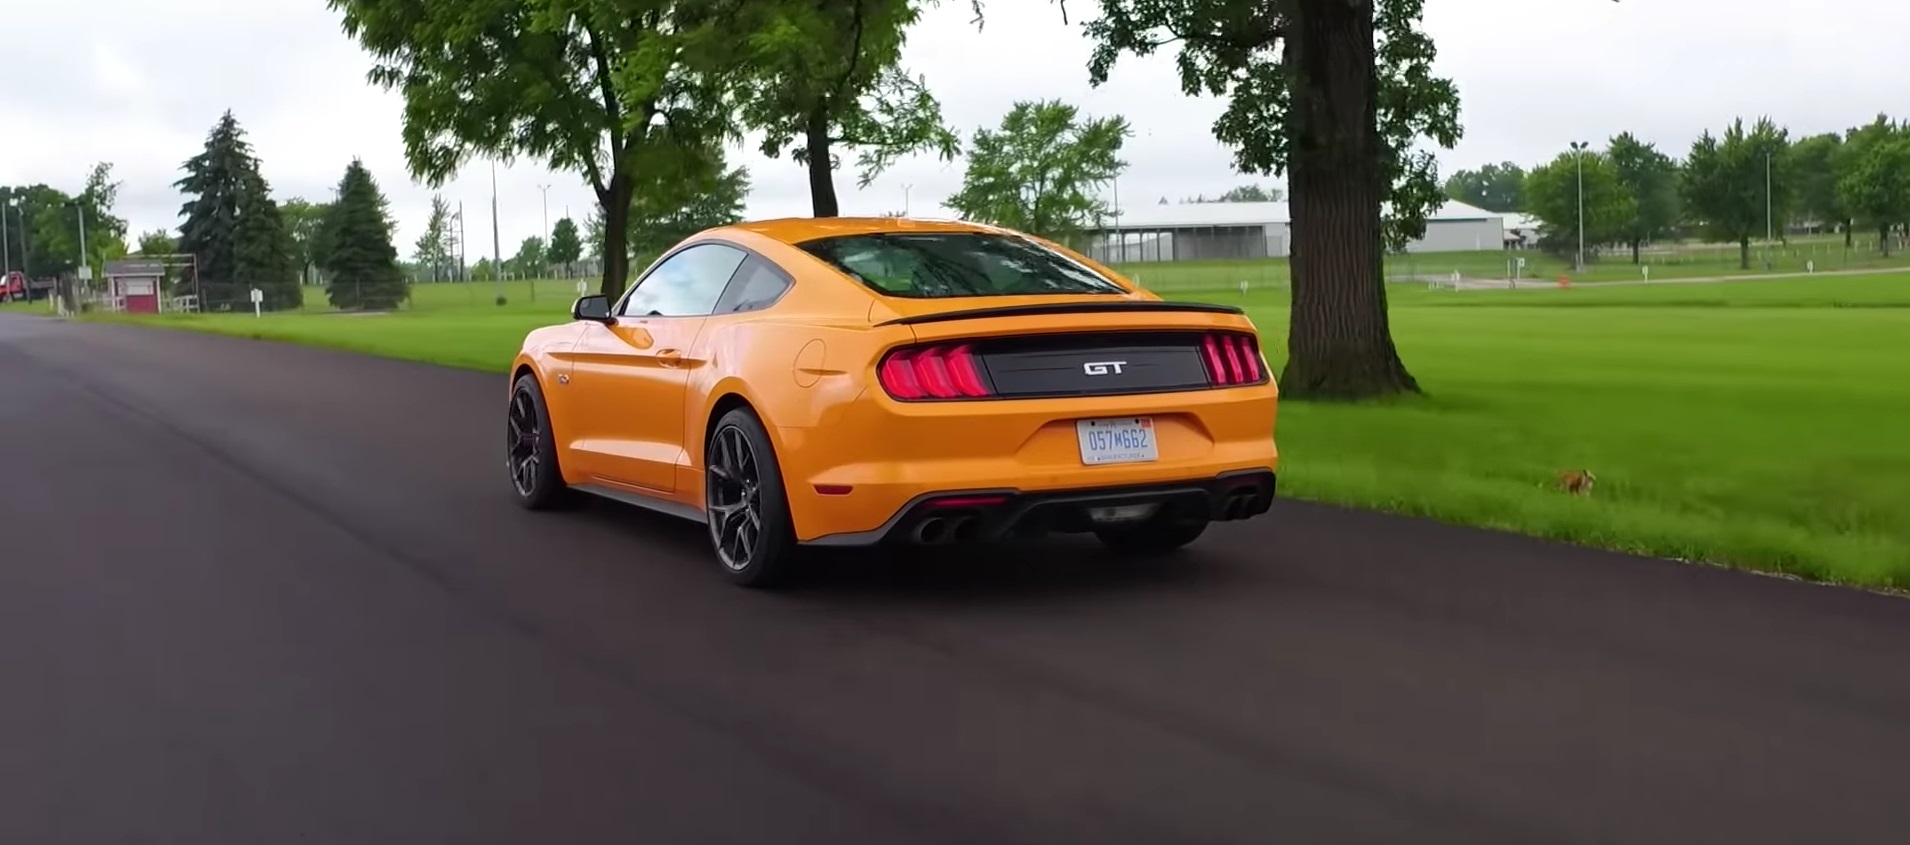 Video: 2018 Ford Mustang GT vs 2018 BMW M4 Comparison